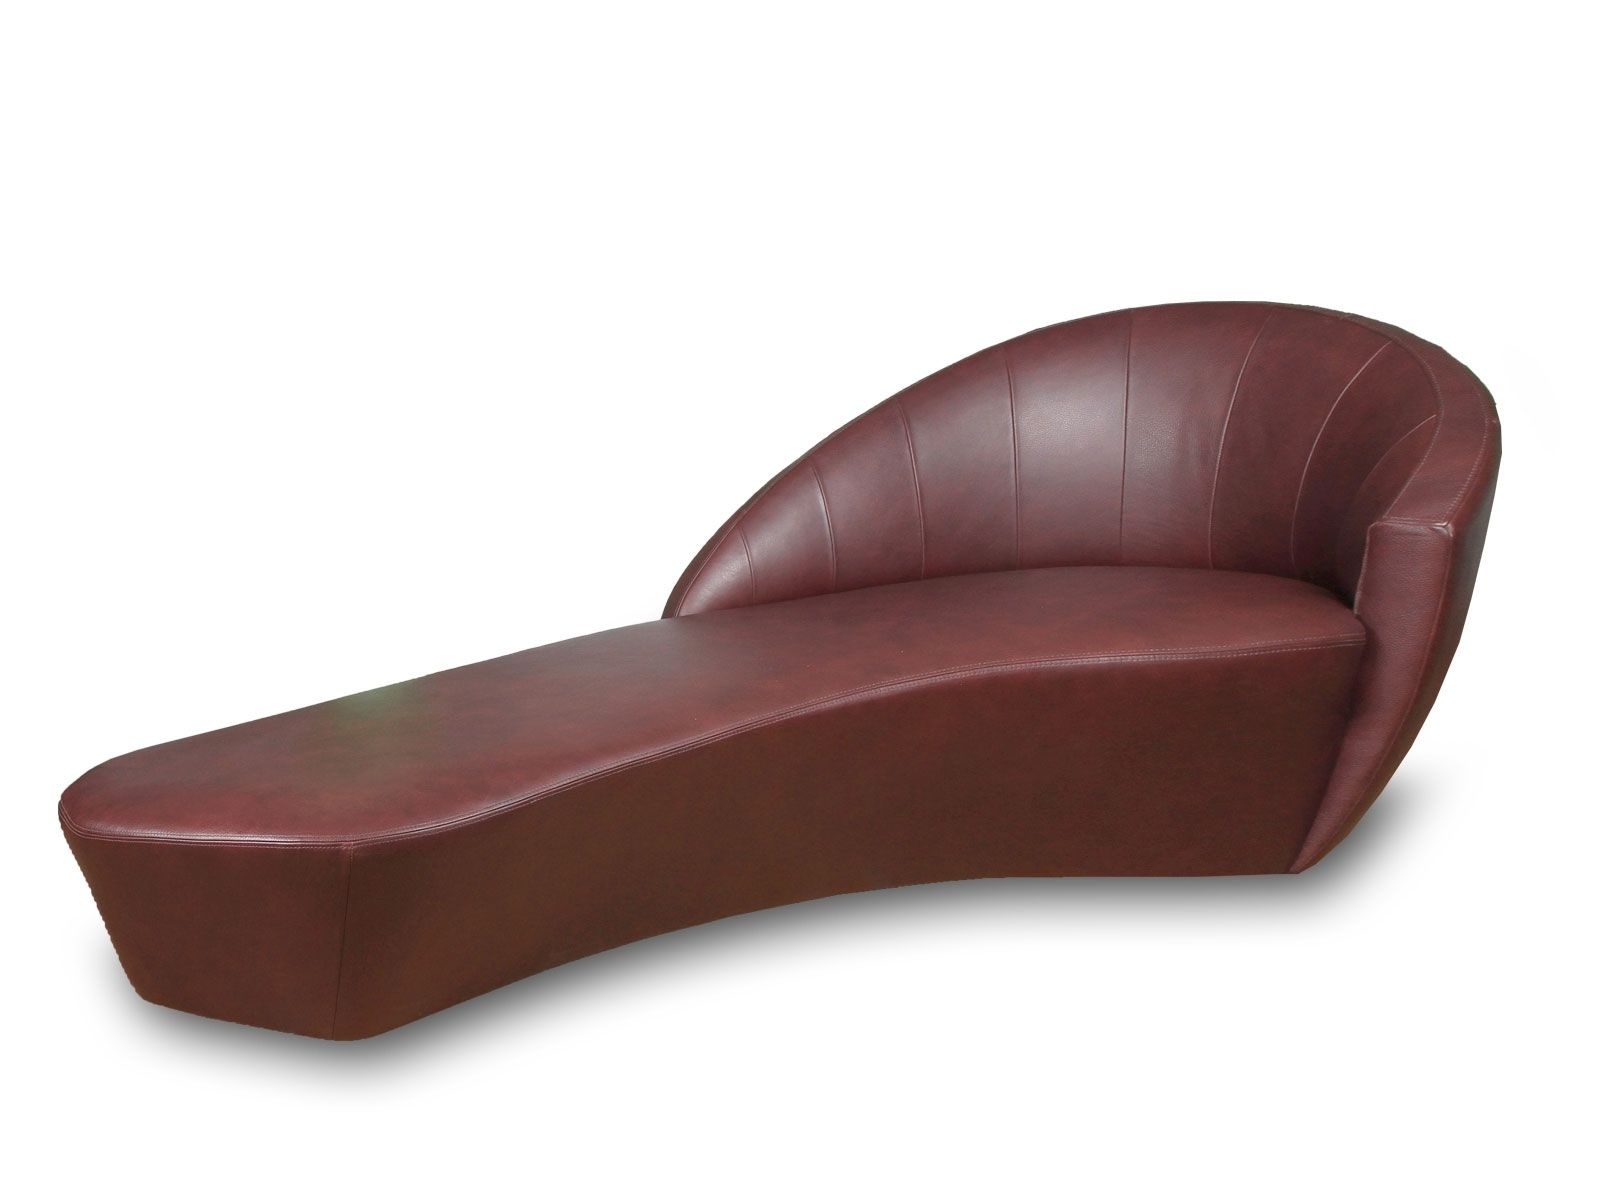 Leather Lounge Sofas With Regard To Well Known Sofa : Fancy Modern Leather Chaise Longue Sofa Modern Leather (View 15 of 20)